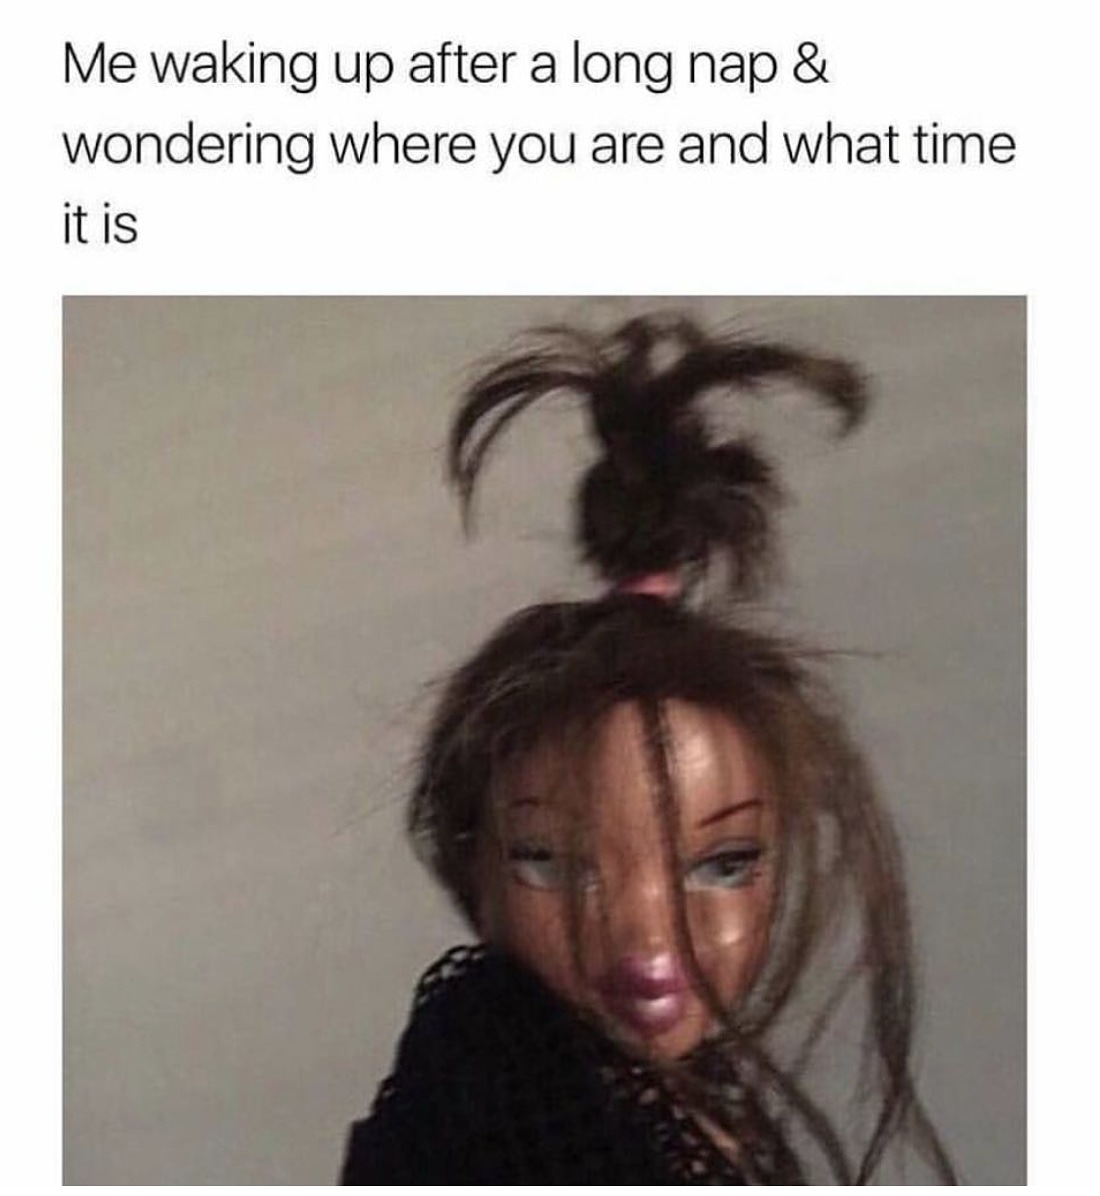 bratz meme messy hair - Me waking up after a long nap & wondering where you are and what time it is